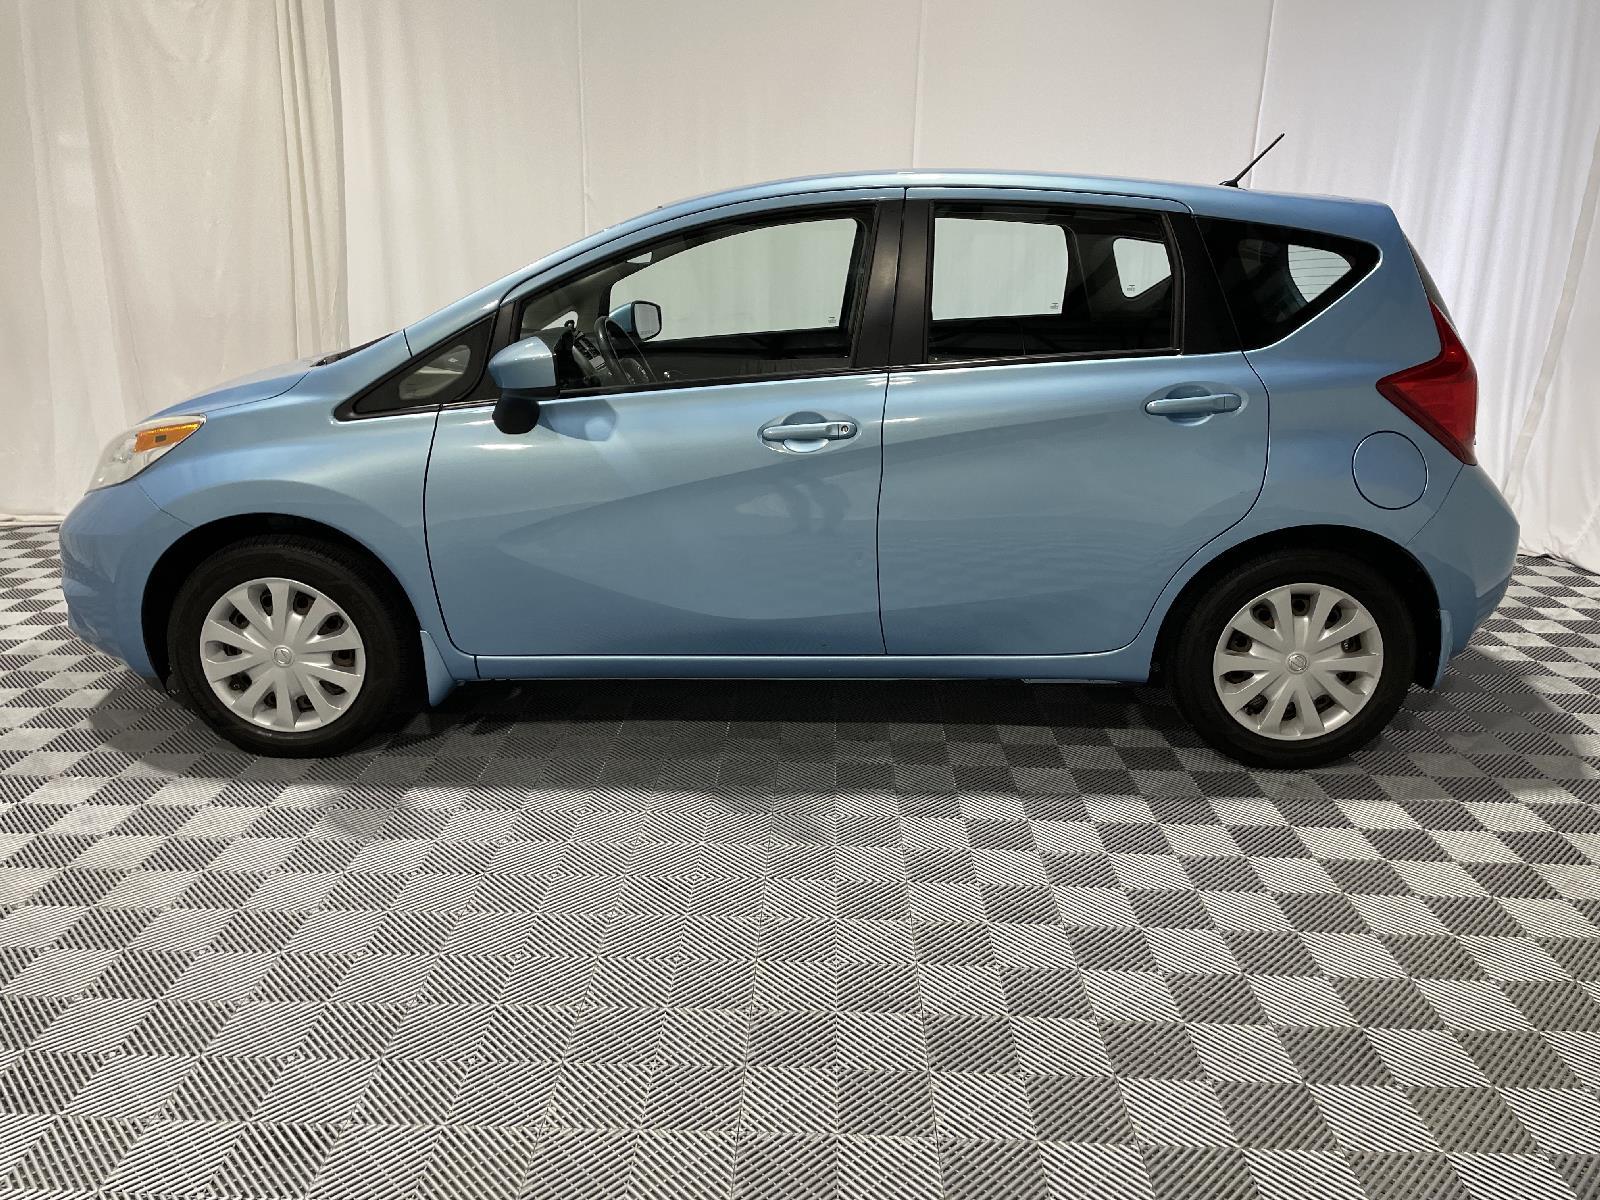 Used 2015 Nissan Versa Note SV with VIN 3N1CE2CP4FL395172 for sale in Saint Joseph, MO